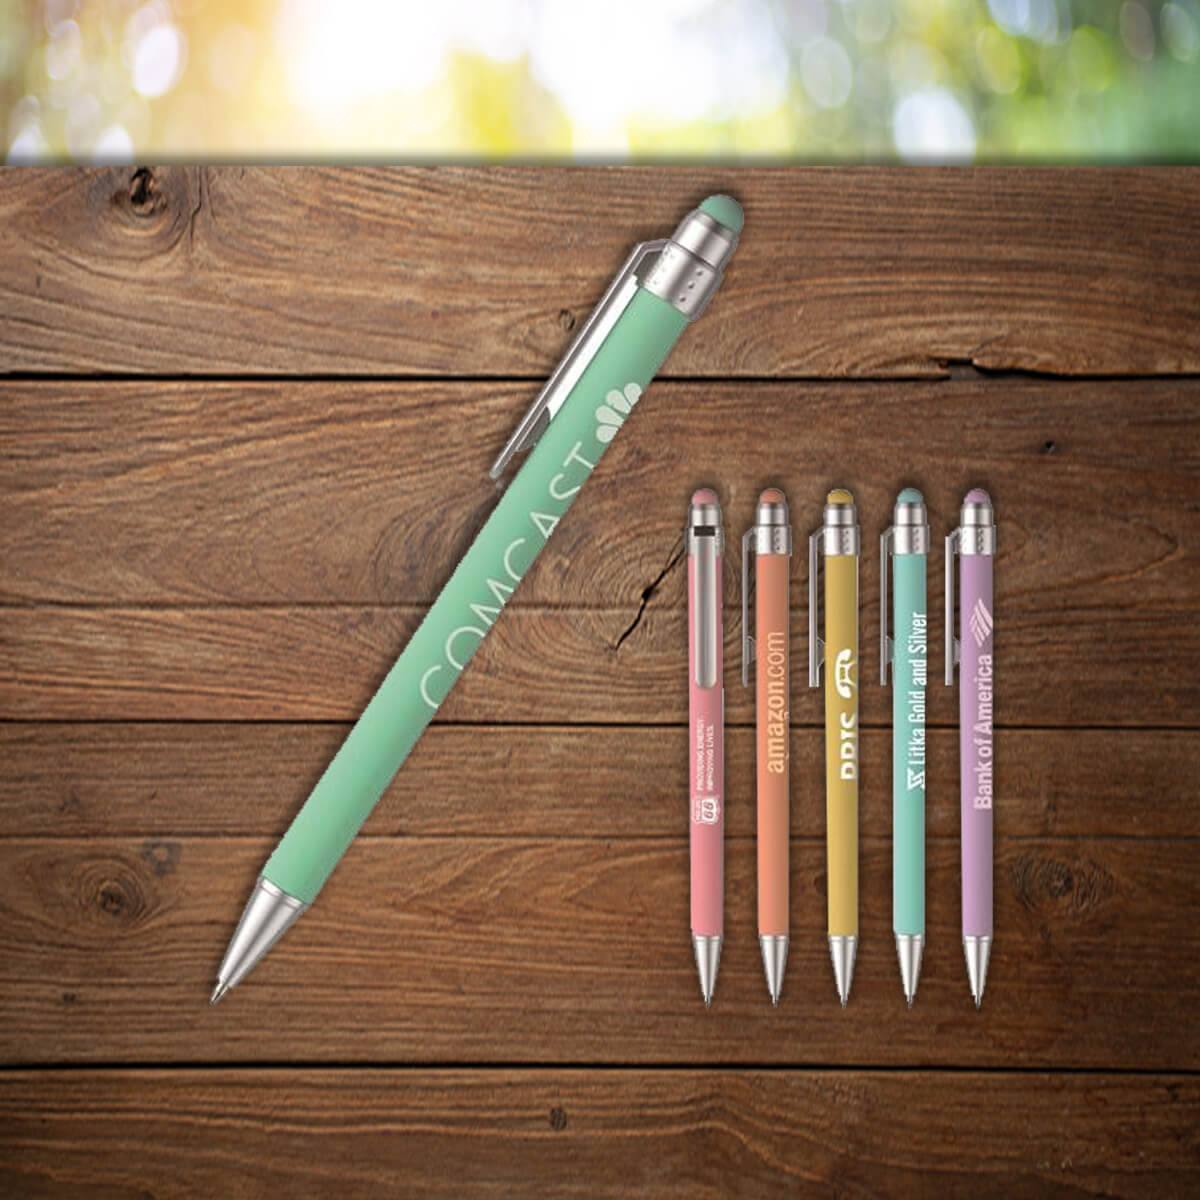 Color and imprint variety shown custom stylus pens promotional writing implements by curative printing